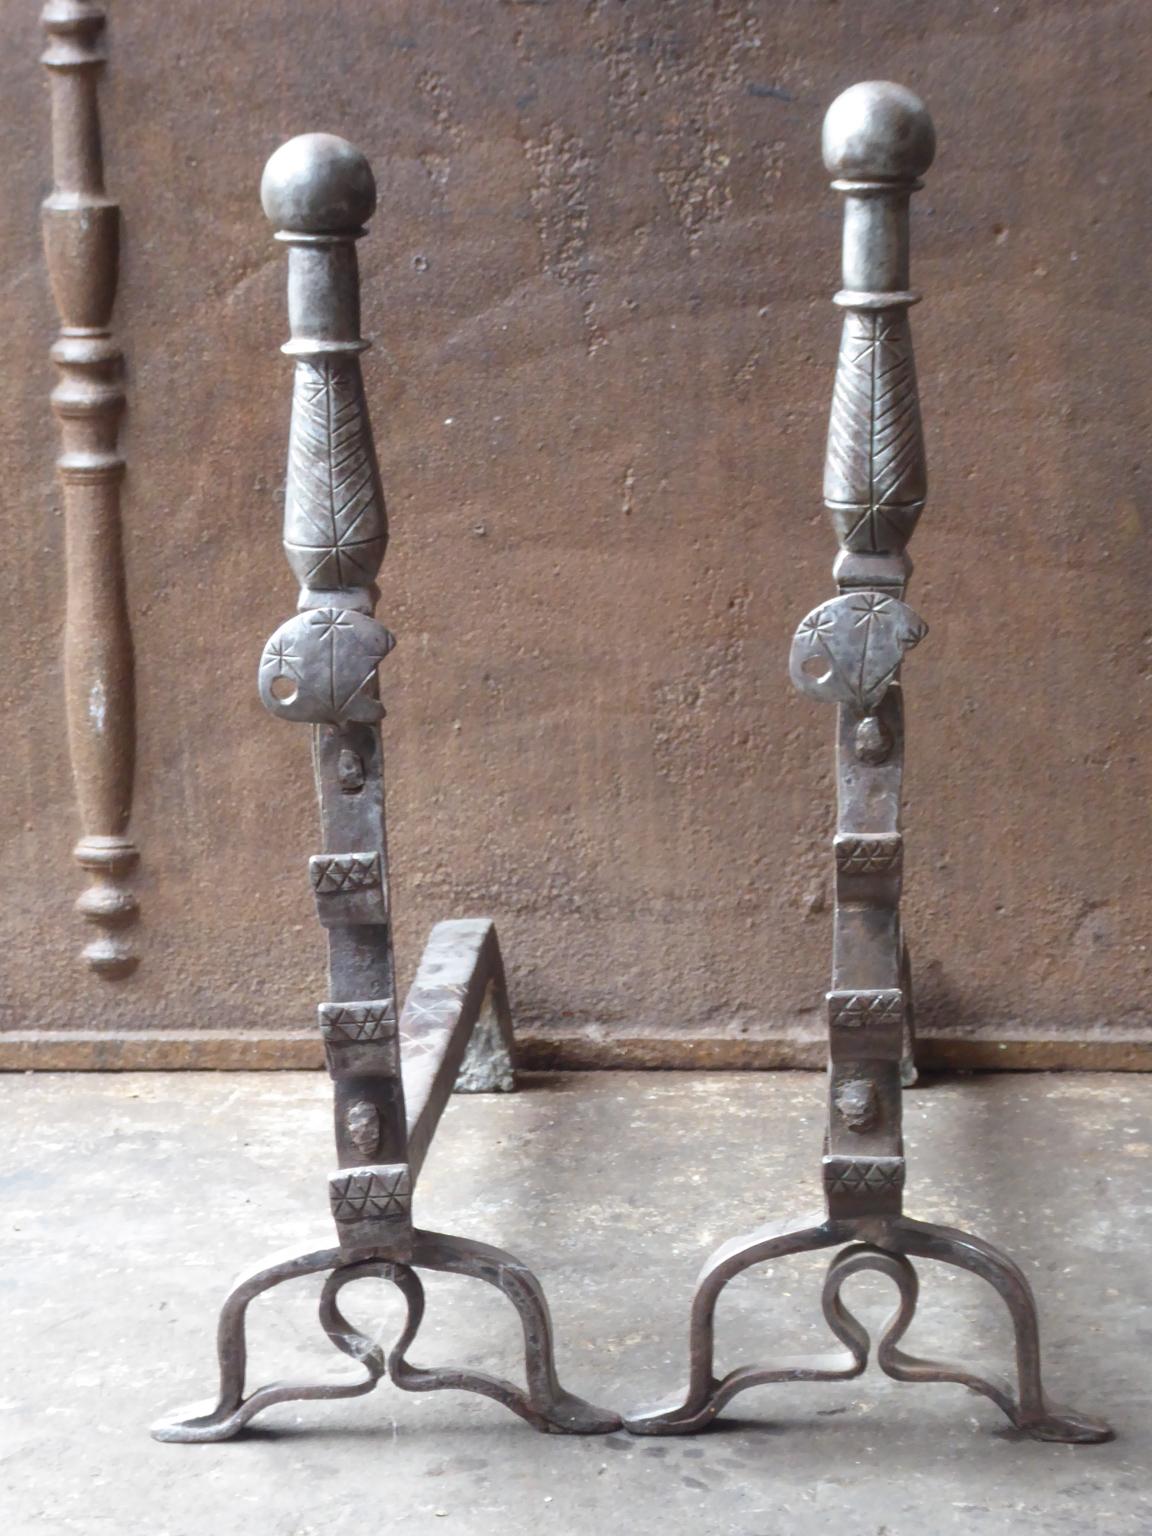 Beautiful 17th century French andirons made of wrought iron. The style of the andirons is Louis XIII and they are from that period. They have a natural brown patina. The andirons have spit hooks to grill food. They are in a good condition, despite